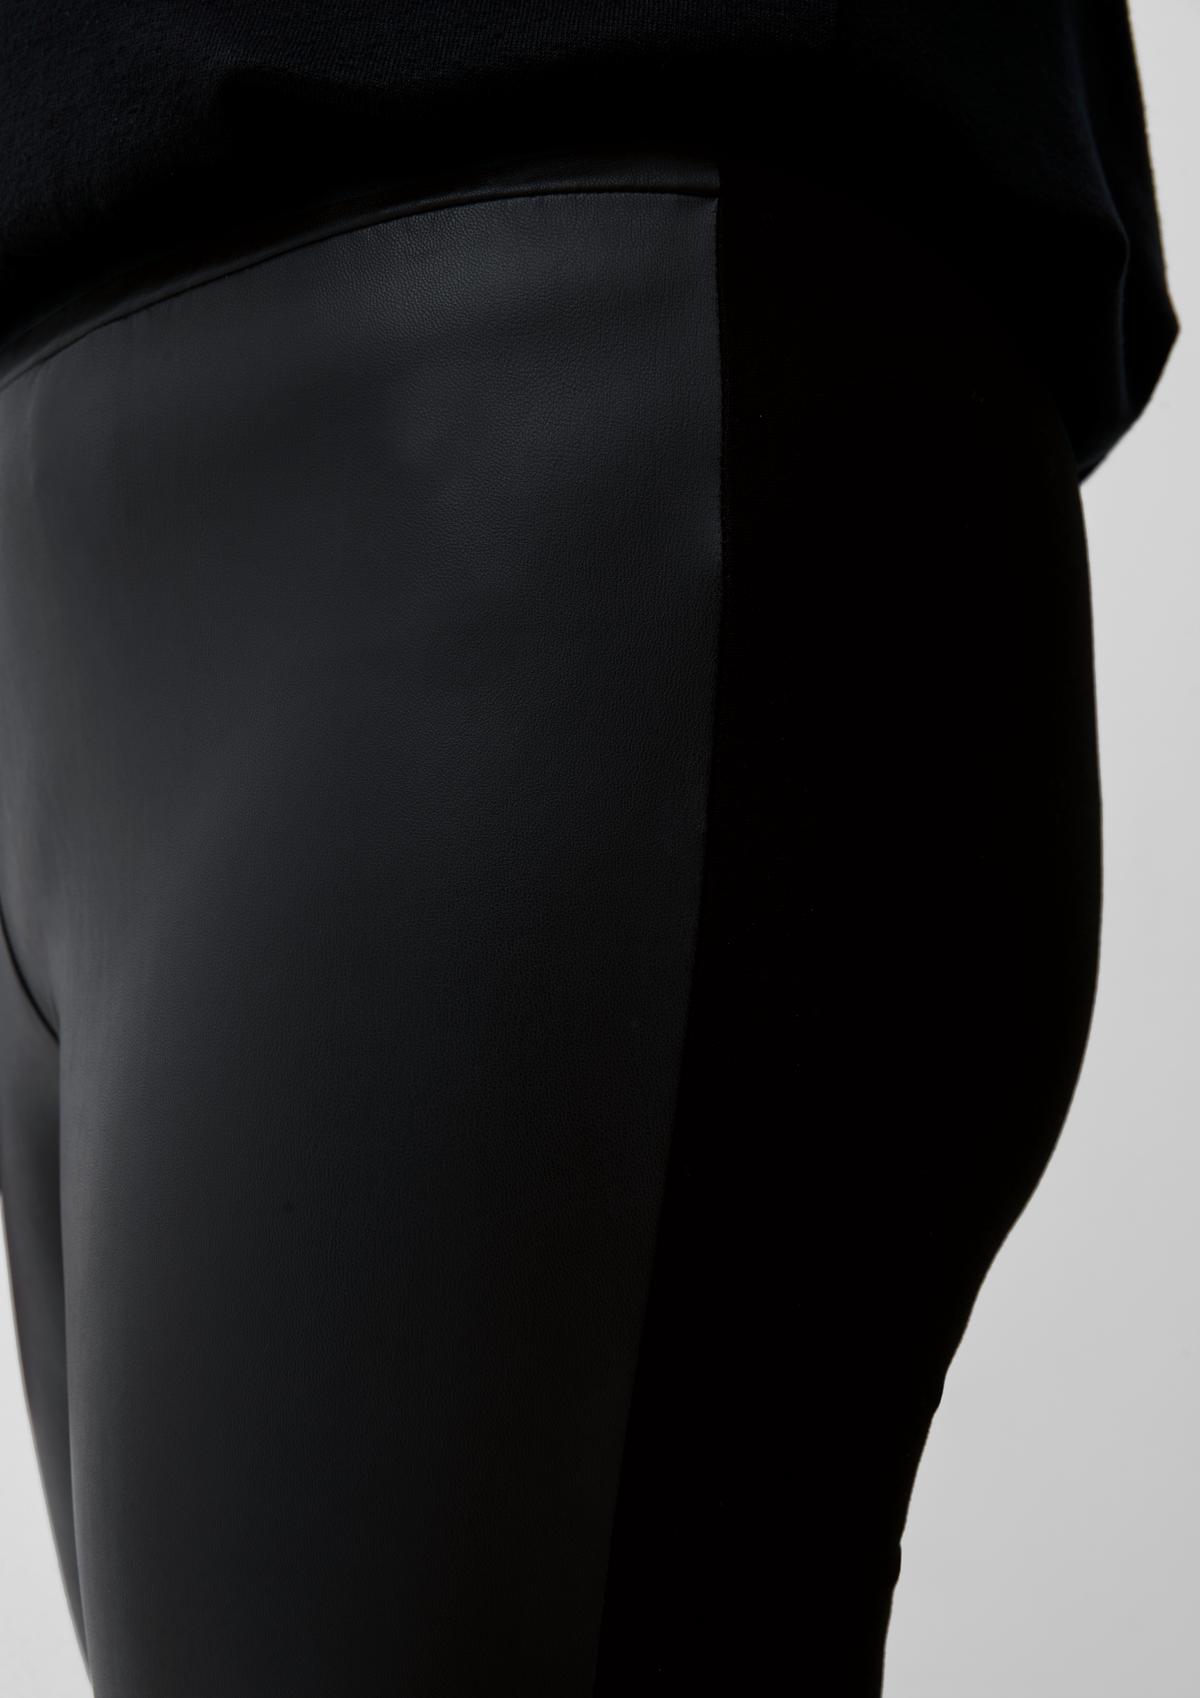 s.Oliver Leggings with a leather-look front